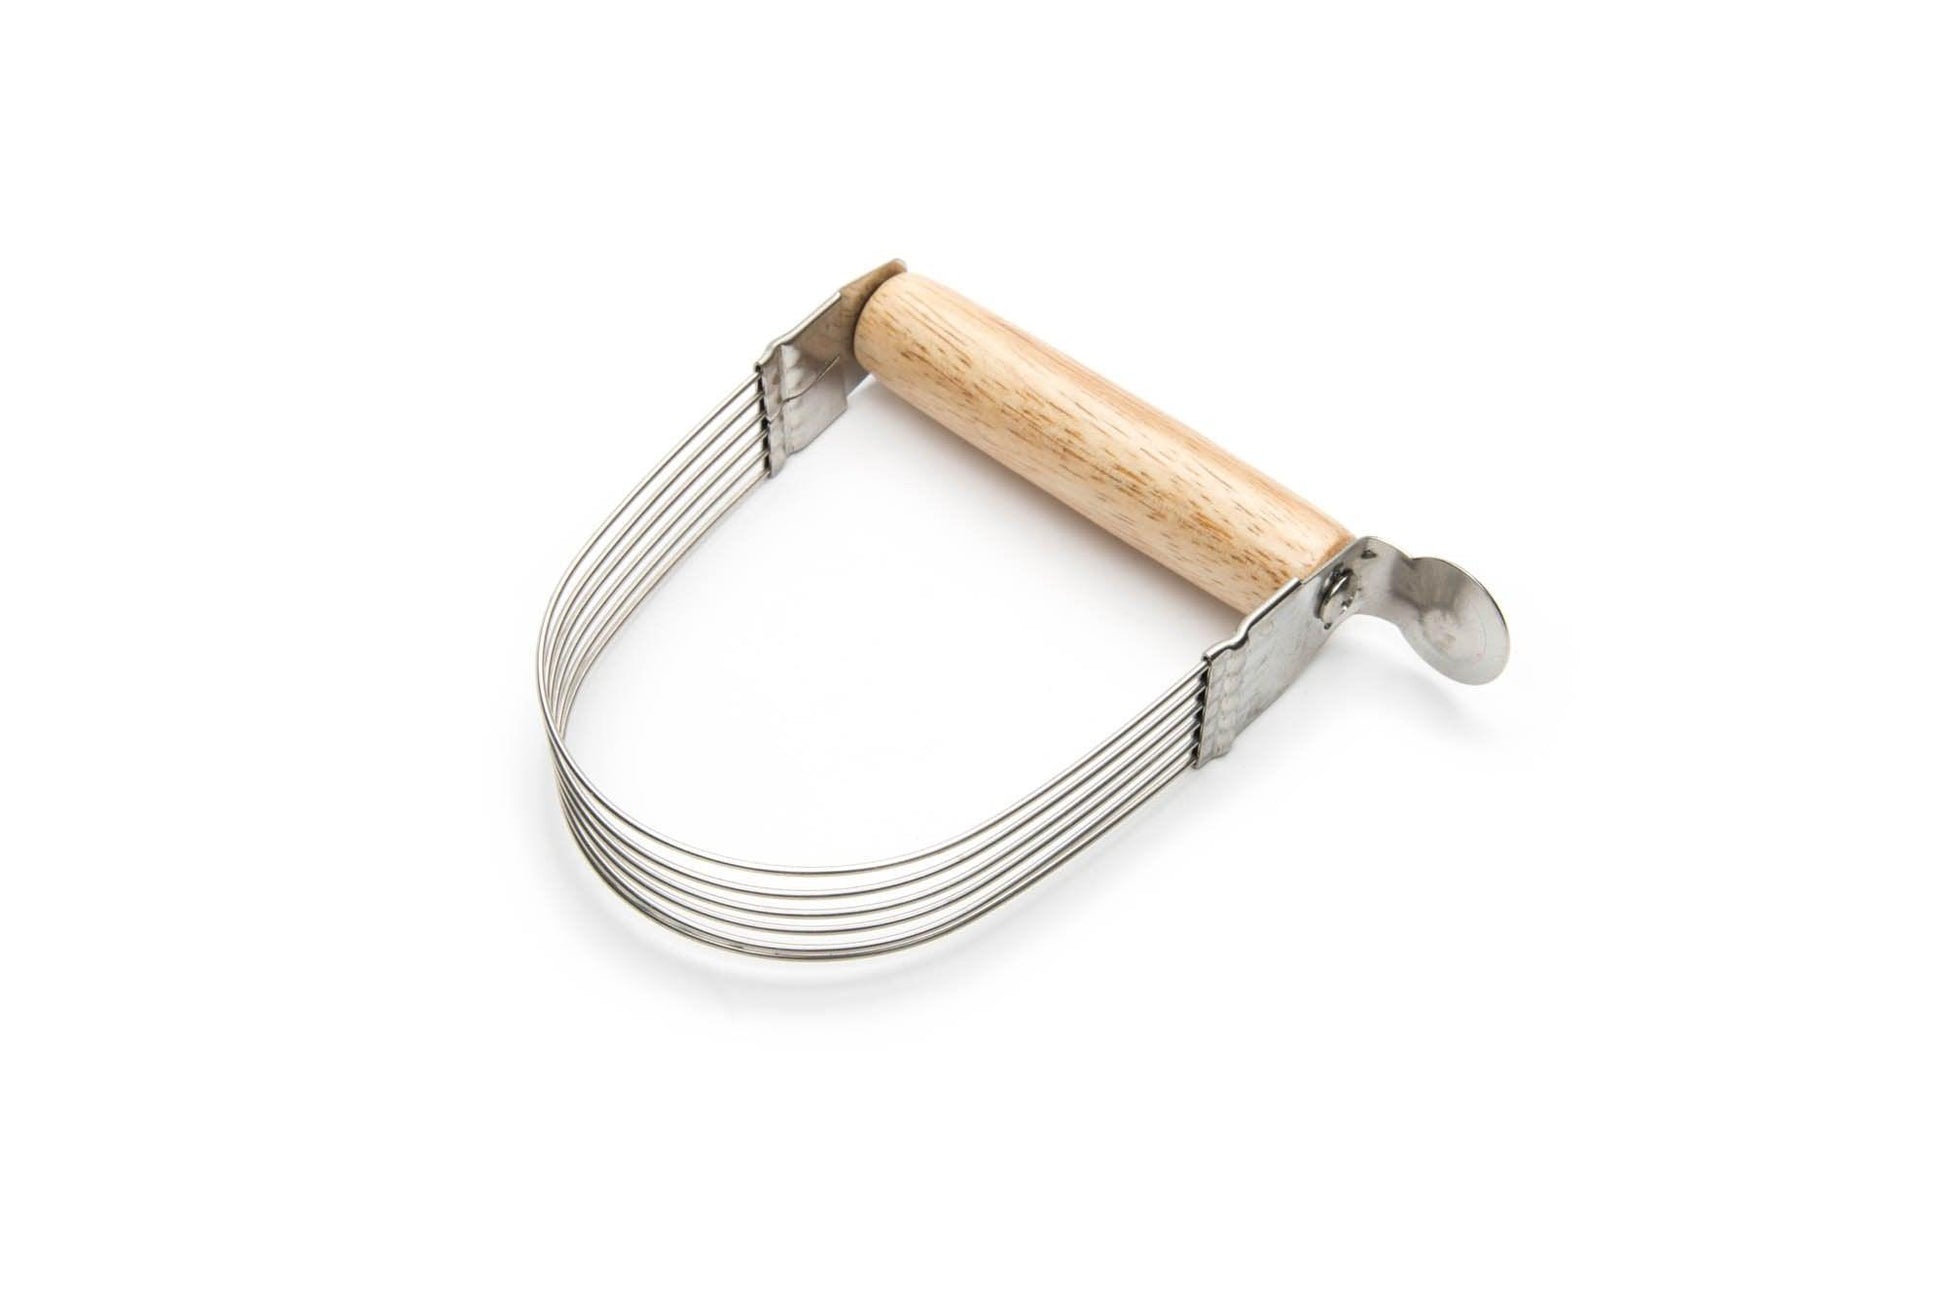 Fox Run Wire Pastry Blender, 5", Steel and Wood - CookCave